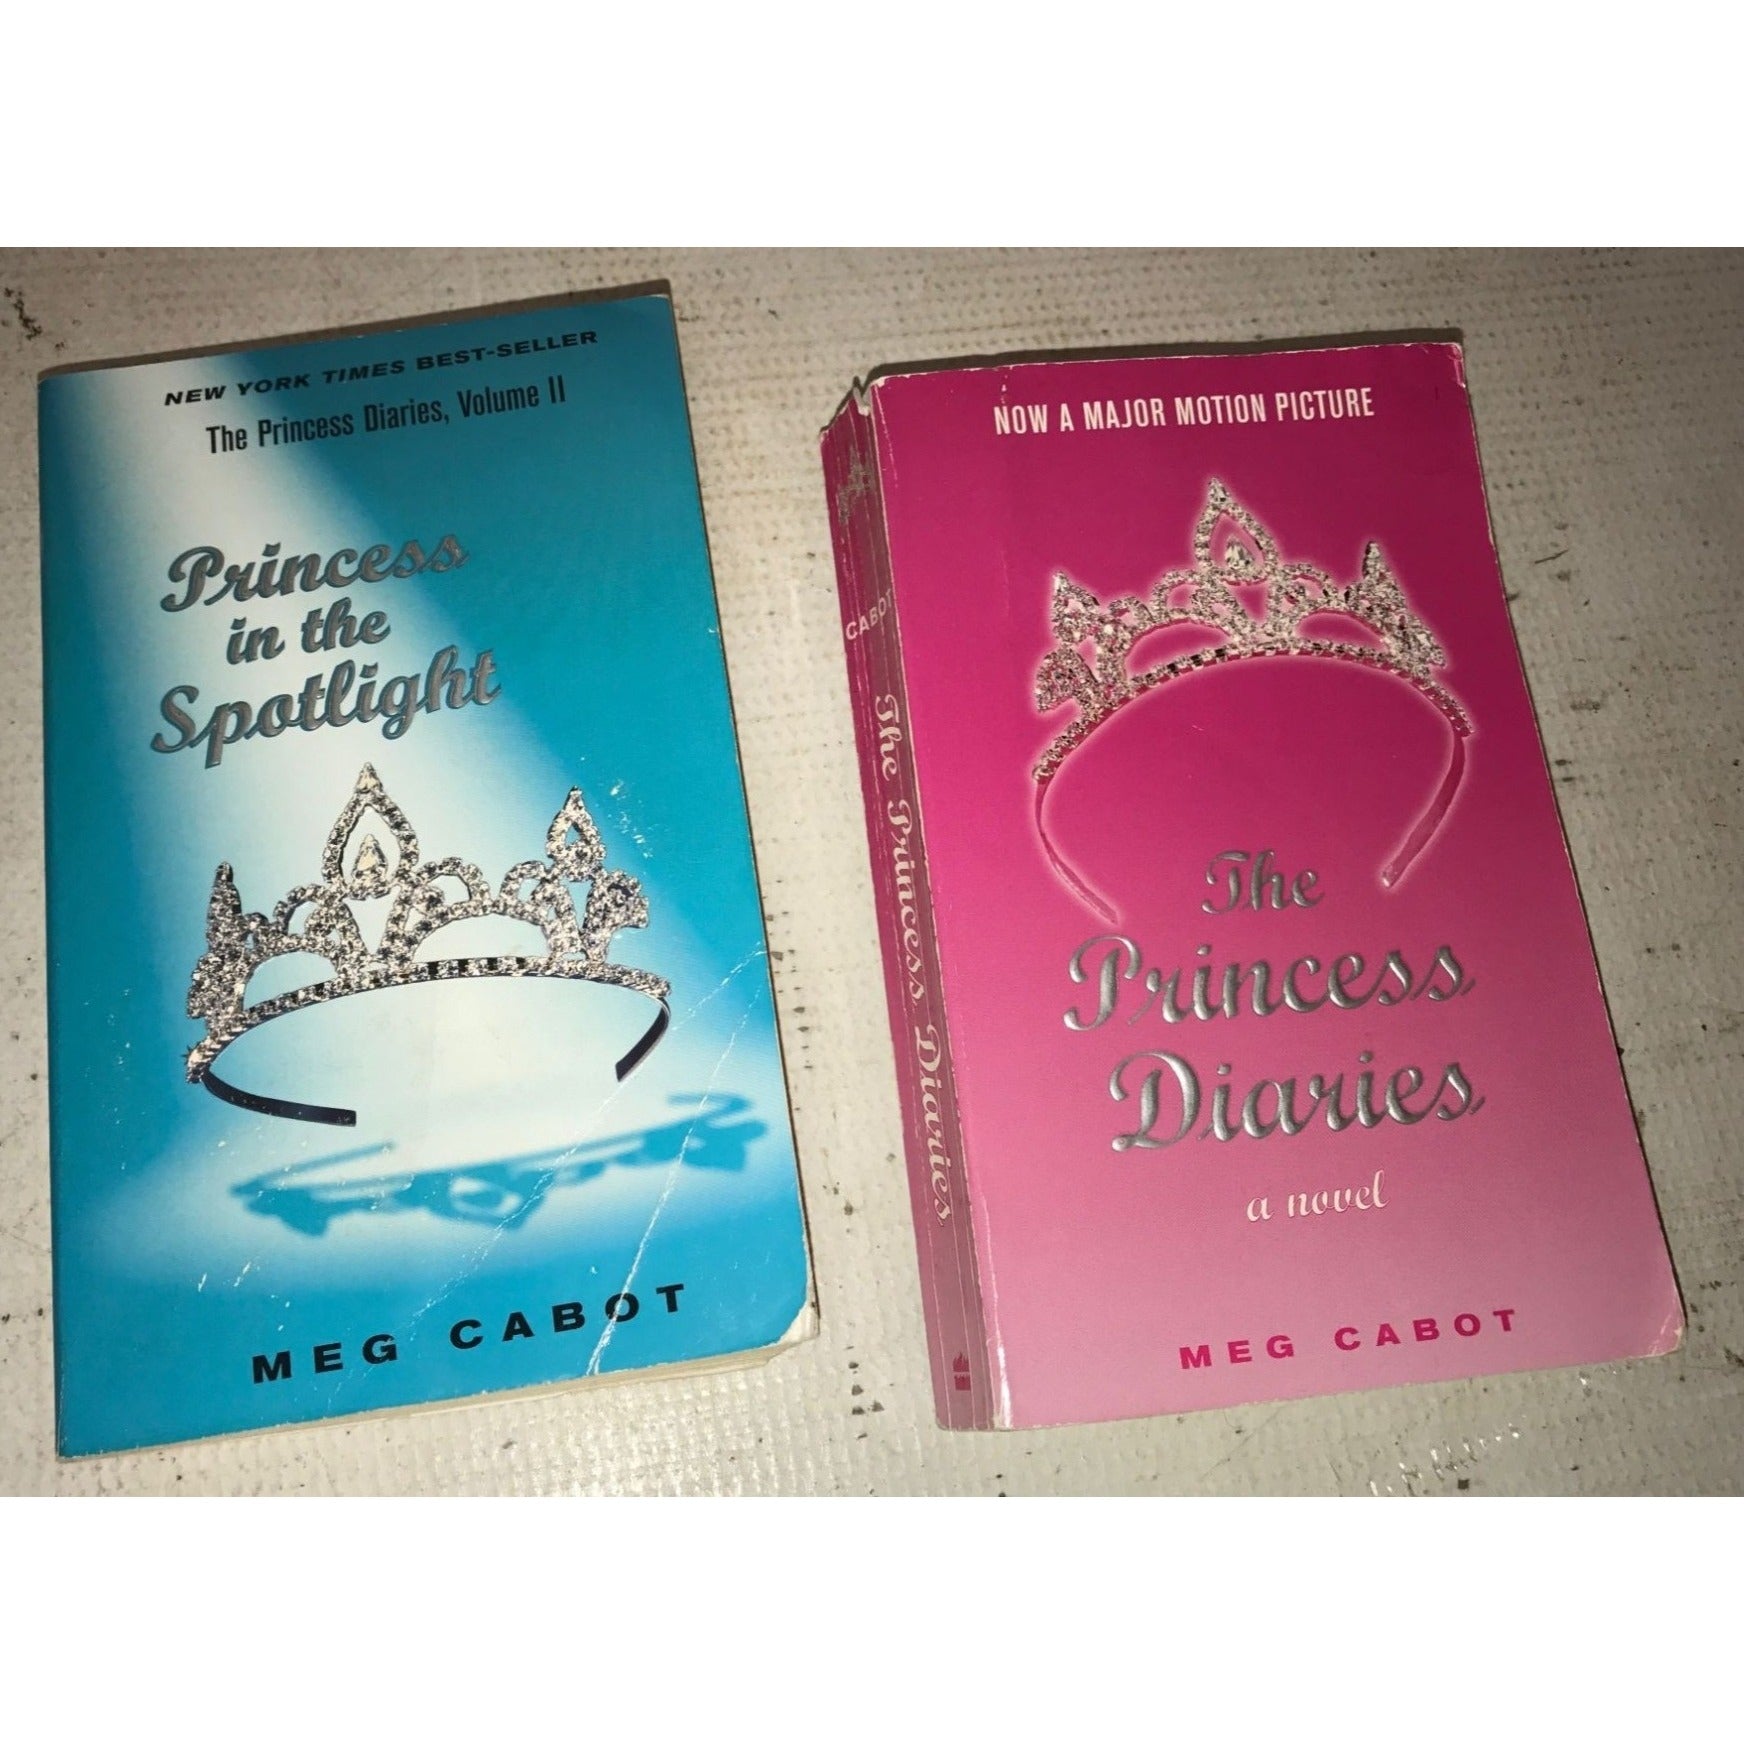 Princess In the Spotlight/The Princess Diaries Set of 2 books by Meg Cabot